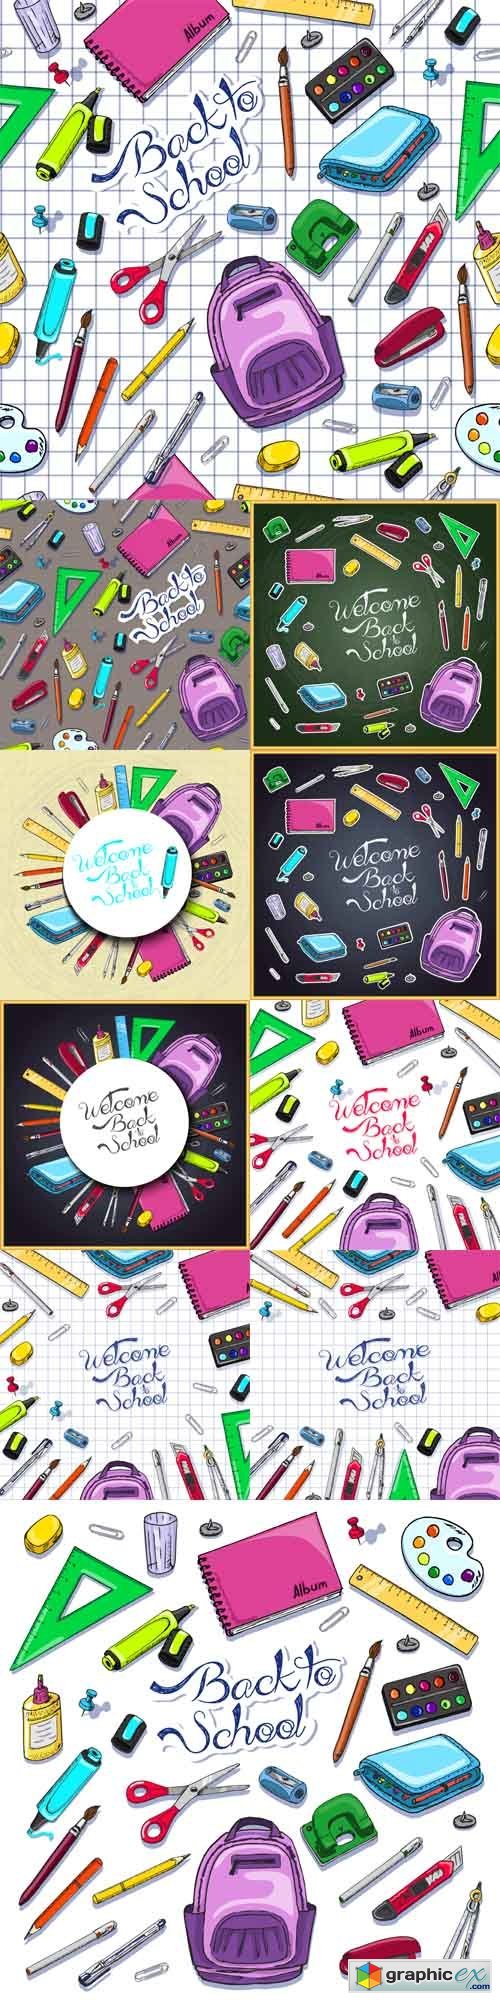 Illustrations of Back to School Supplies